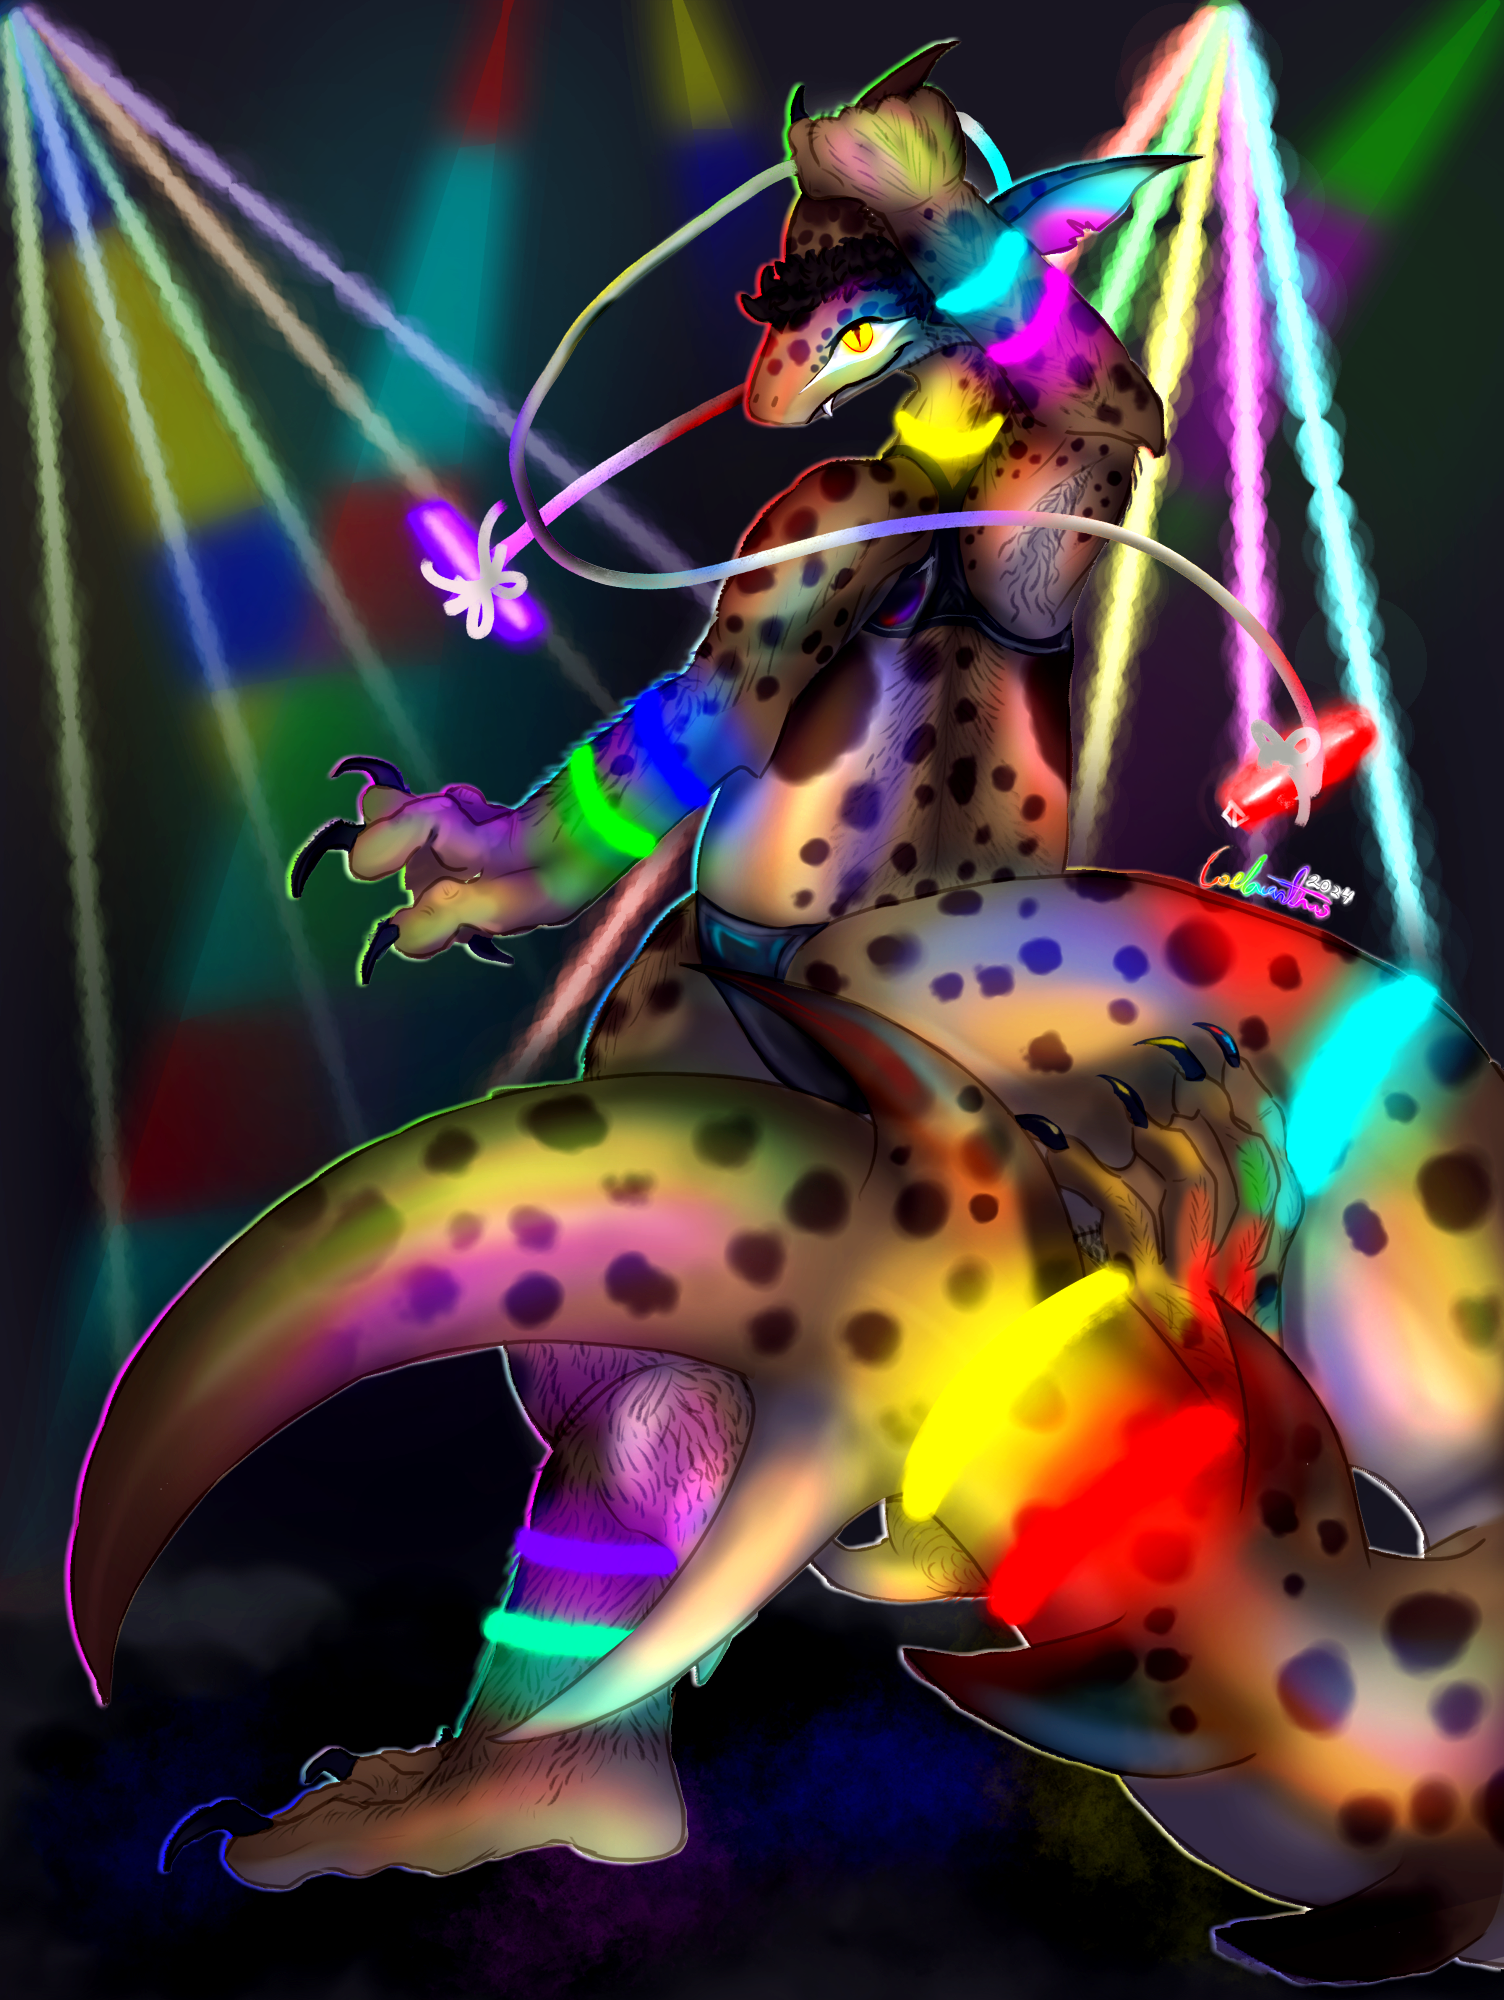 A colorful drawing of an epaulette shark furry covered in glowsticks dancing in a place with colorful lights. He's swinging around a string with two glowsticks on the end and looking at the viewer.